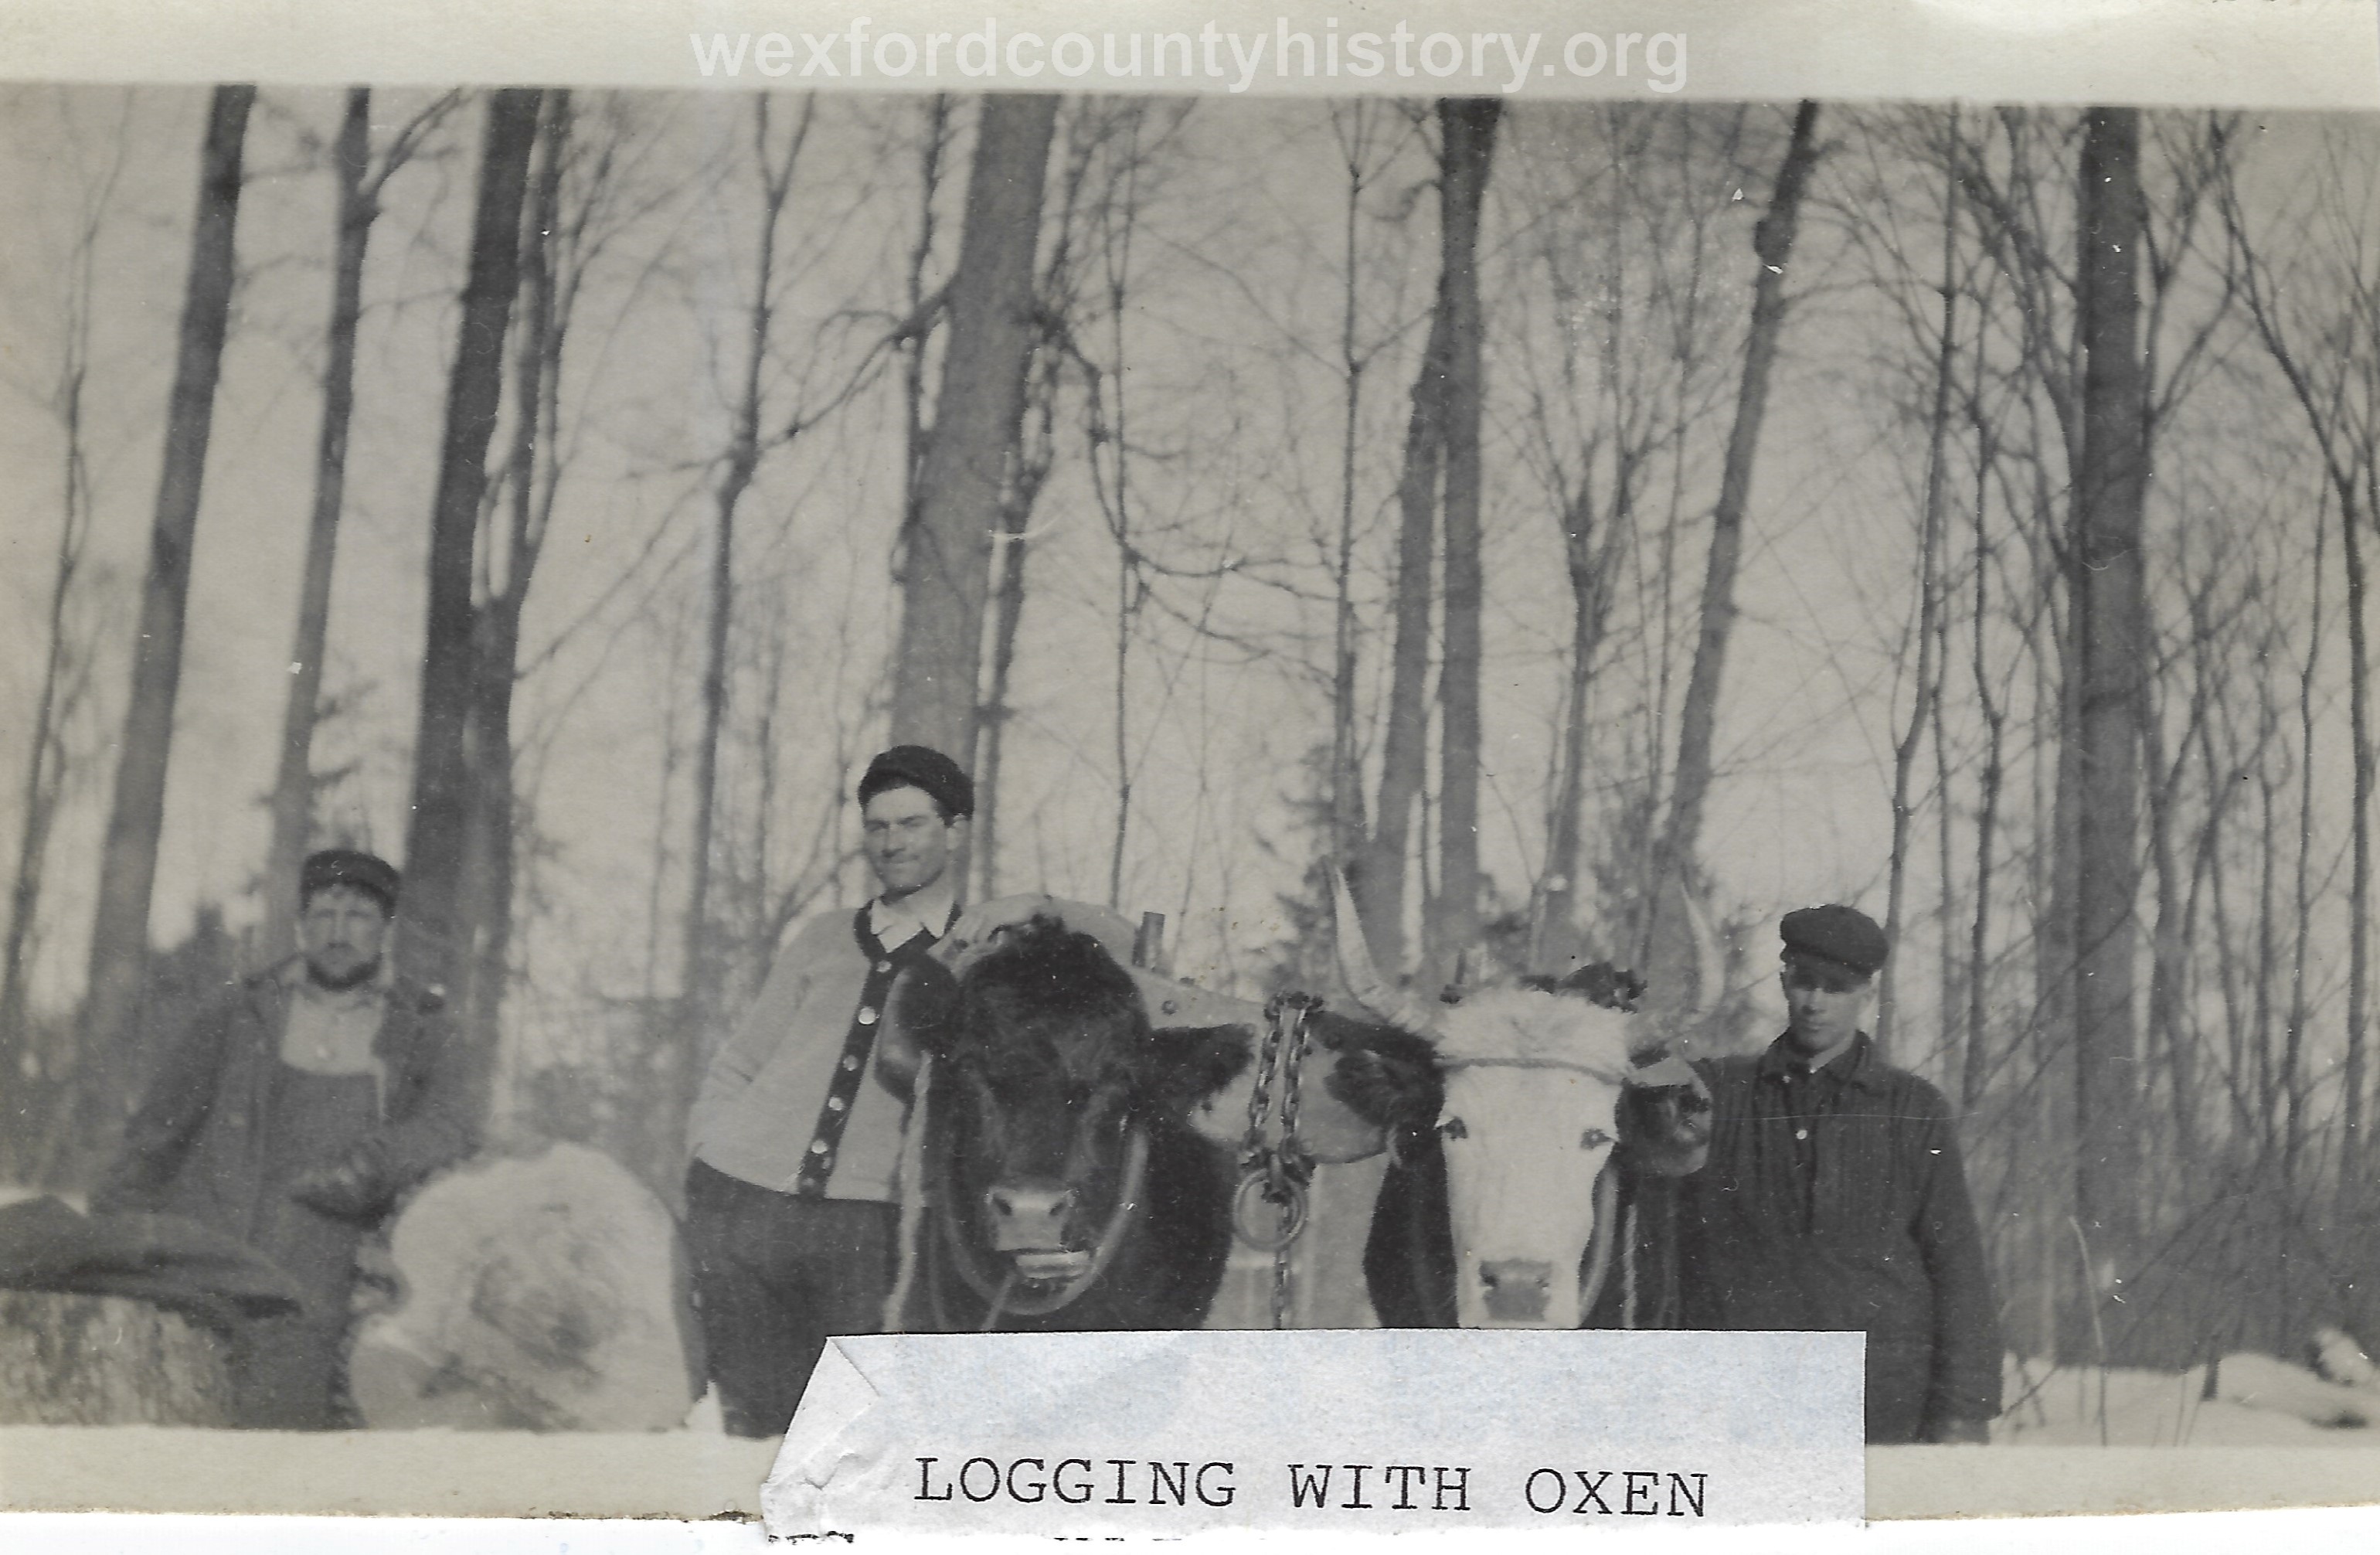 Cadillac-Lumber-Logging-With-Oxen